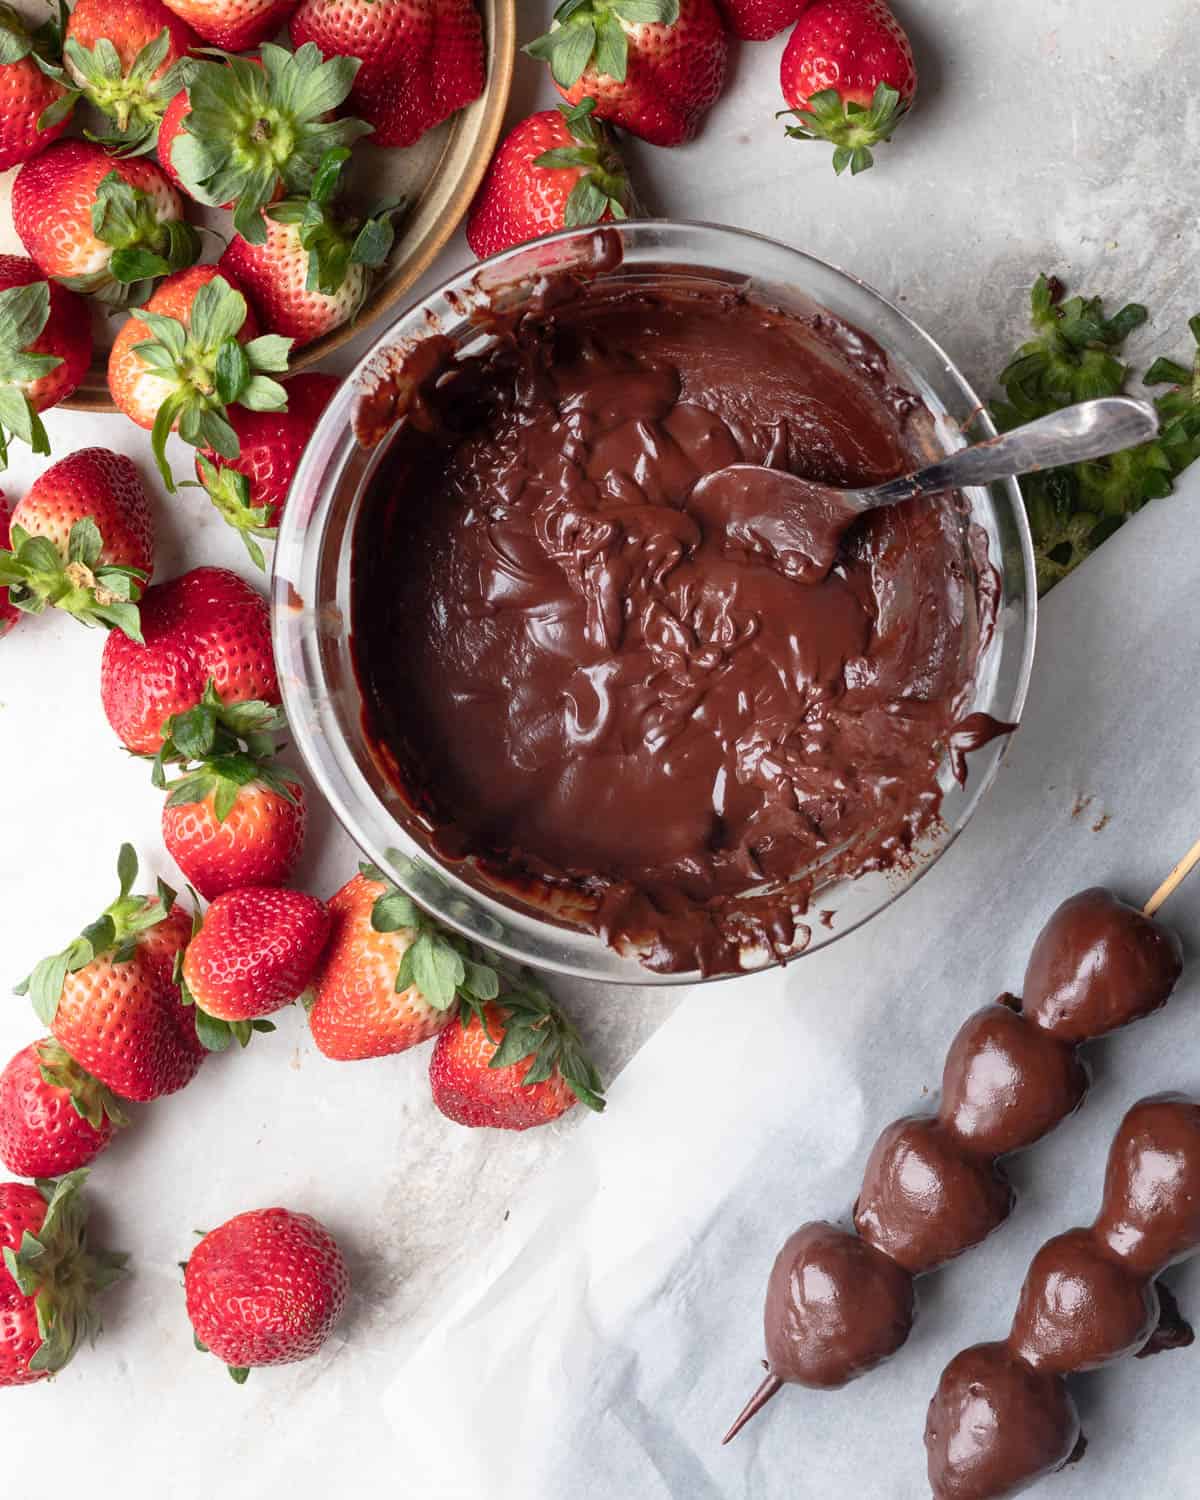 Bowl of vegan chocolate surrounded by fresh strawberries and some already dipped and ready chocolate covered strawberries.